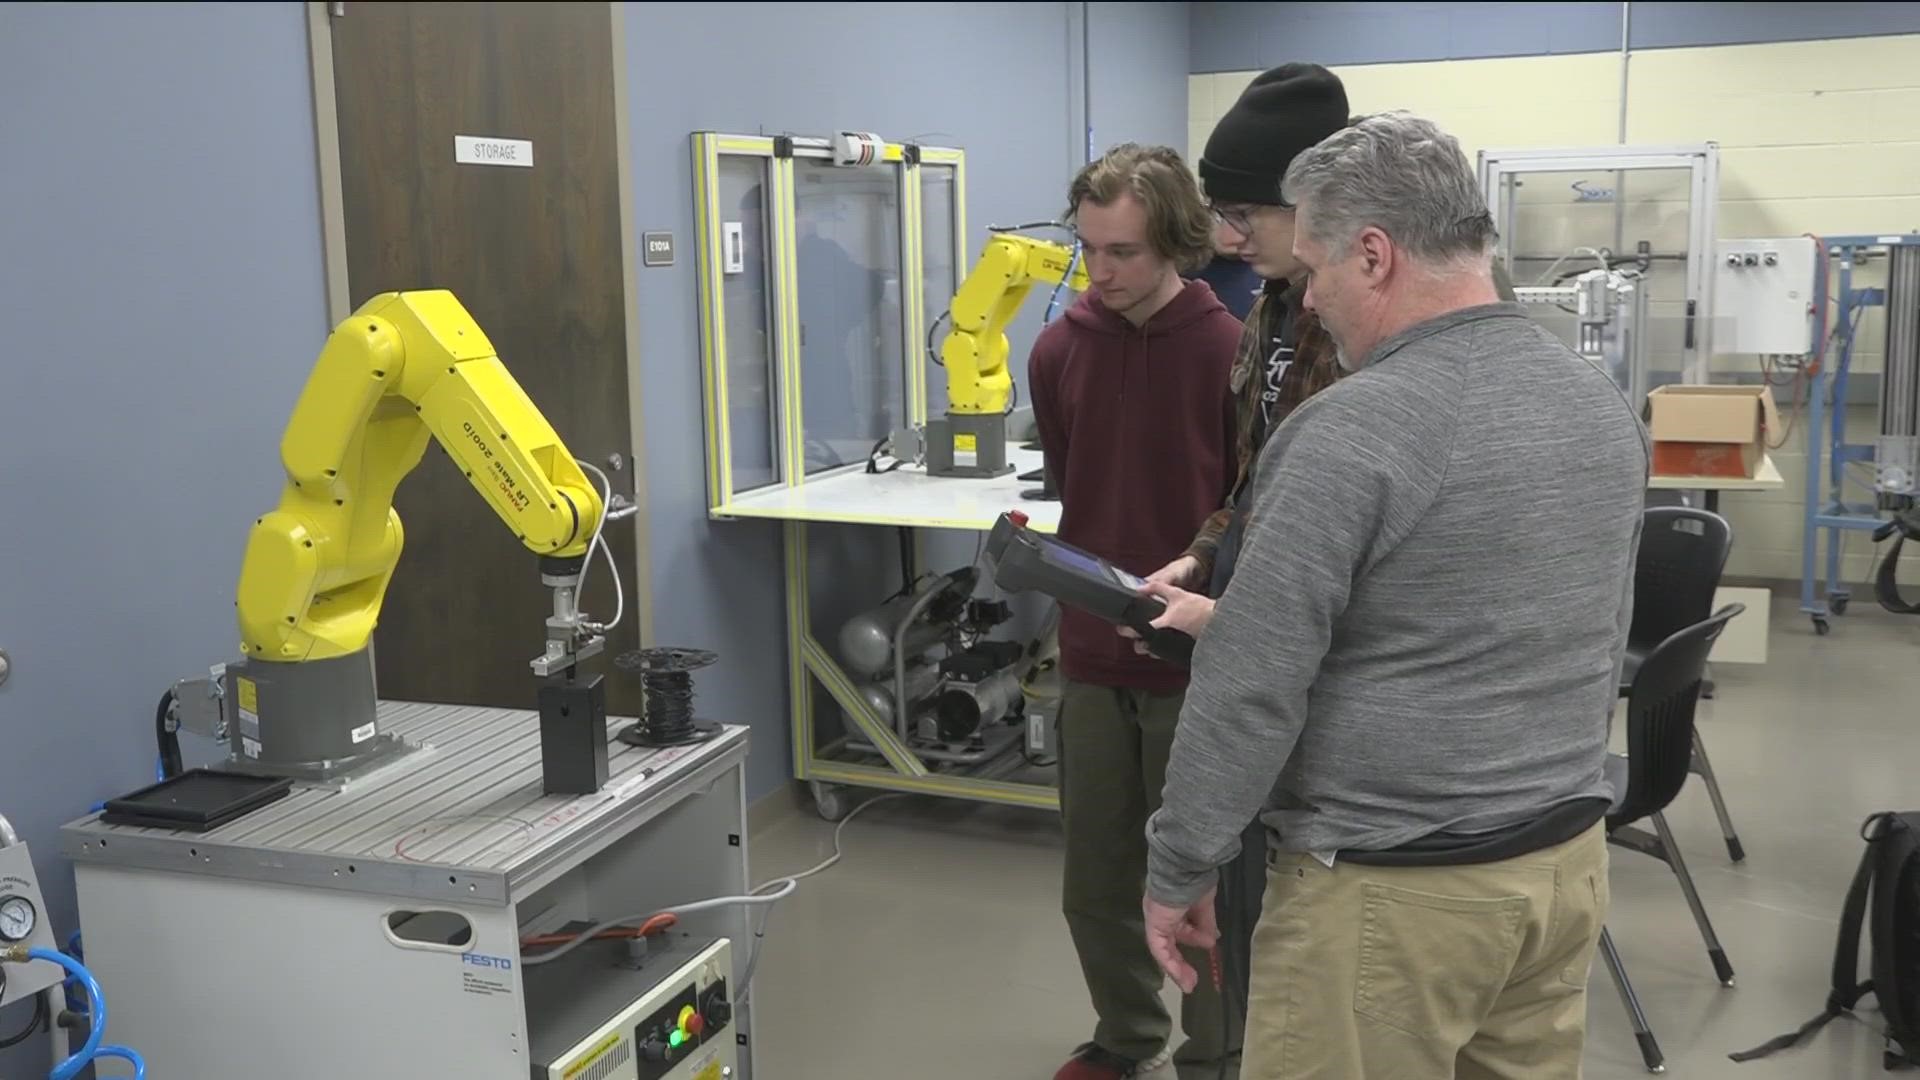 The Industrial Automation and Computer Aided Manufacturing programs will be condensed into a six-week, one-credit hour course to be accessible for busy schedules.